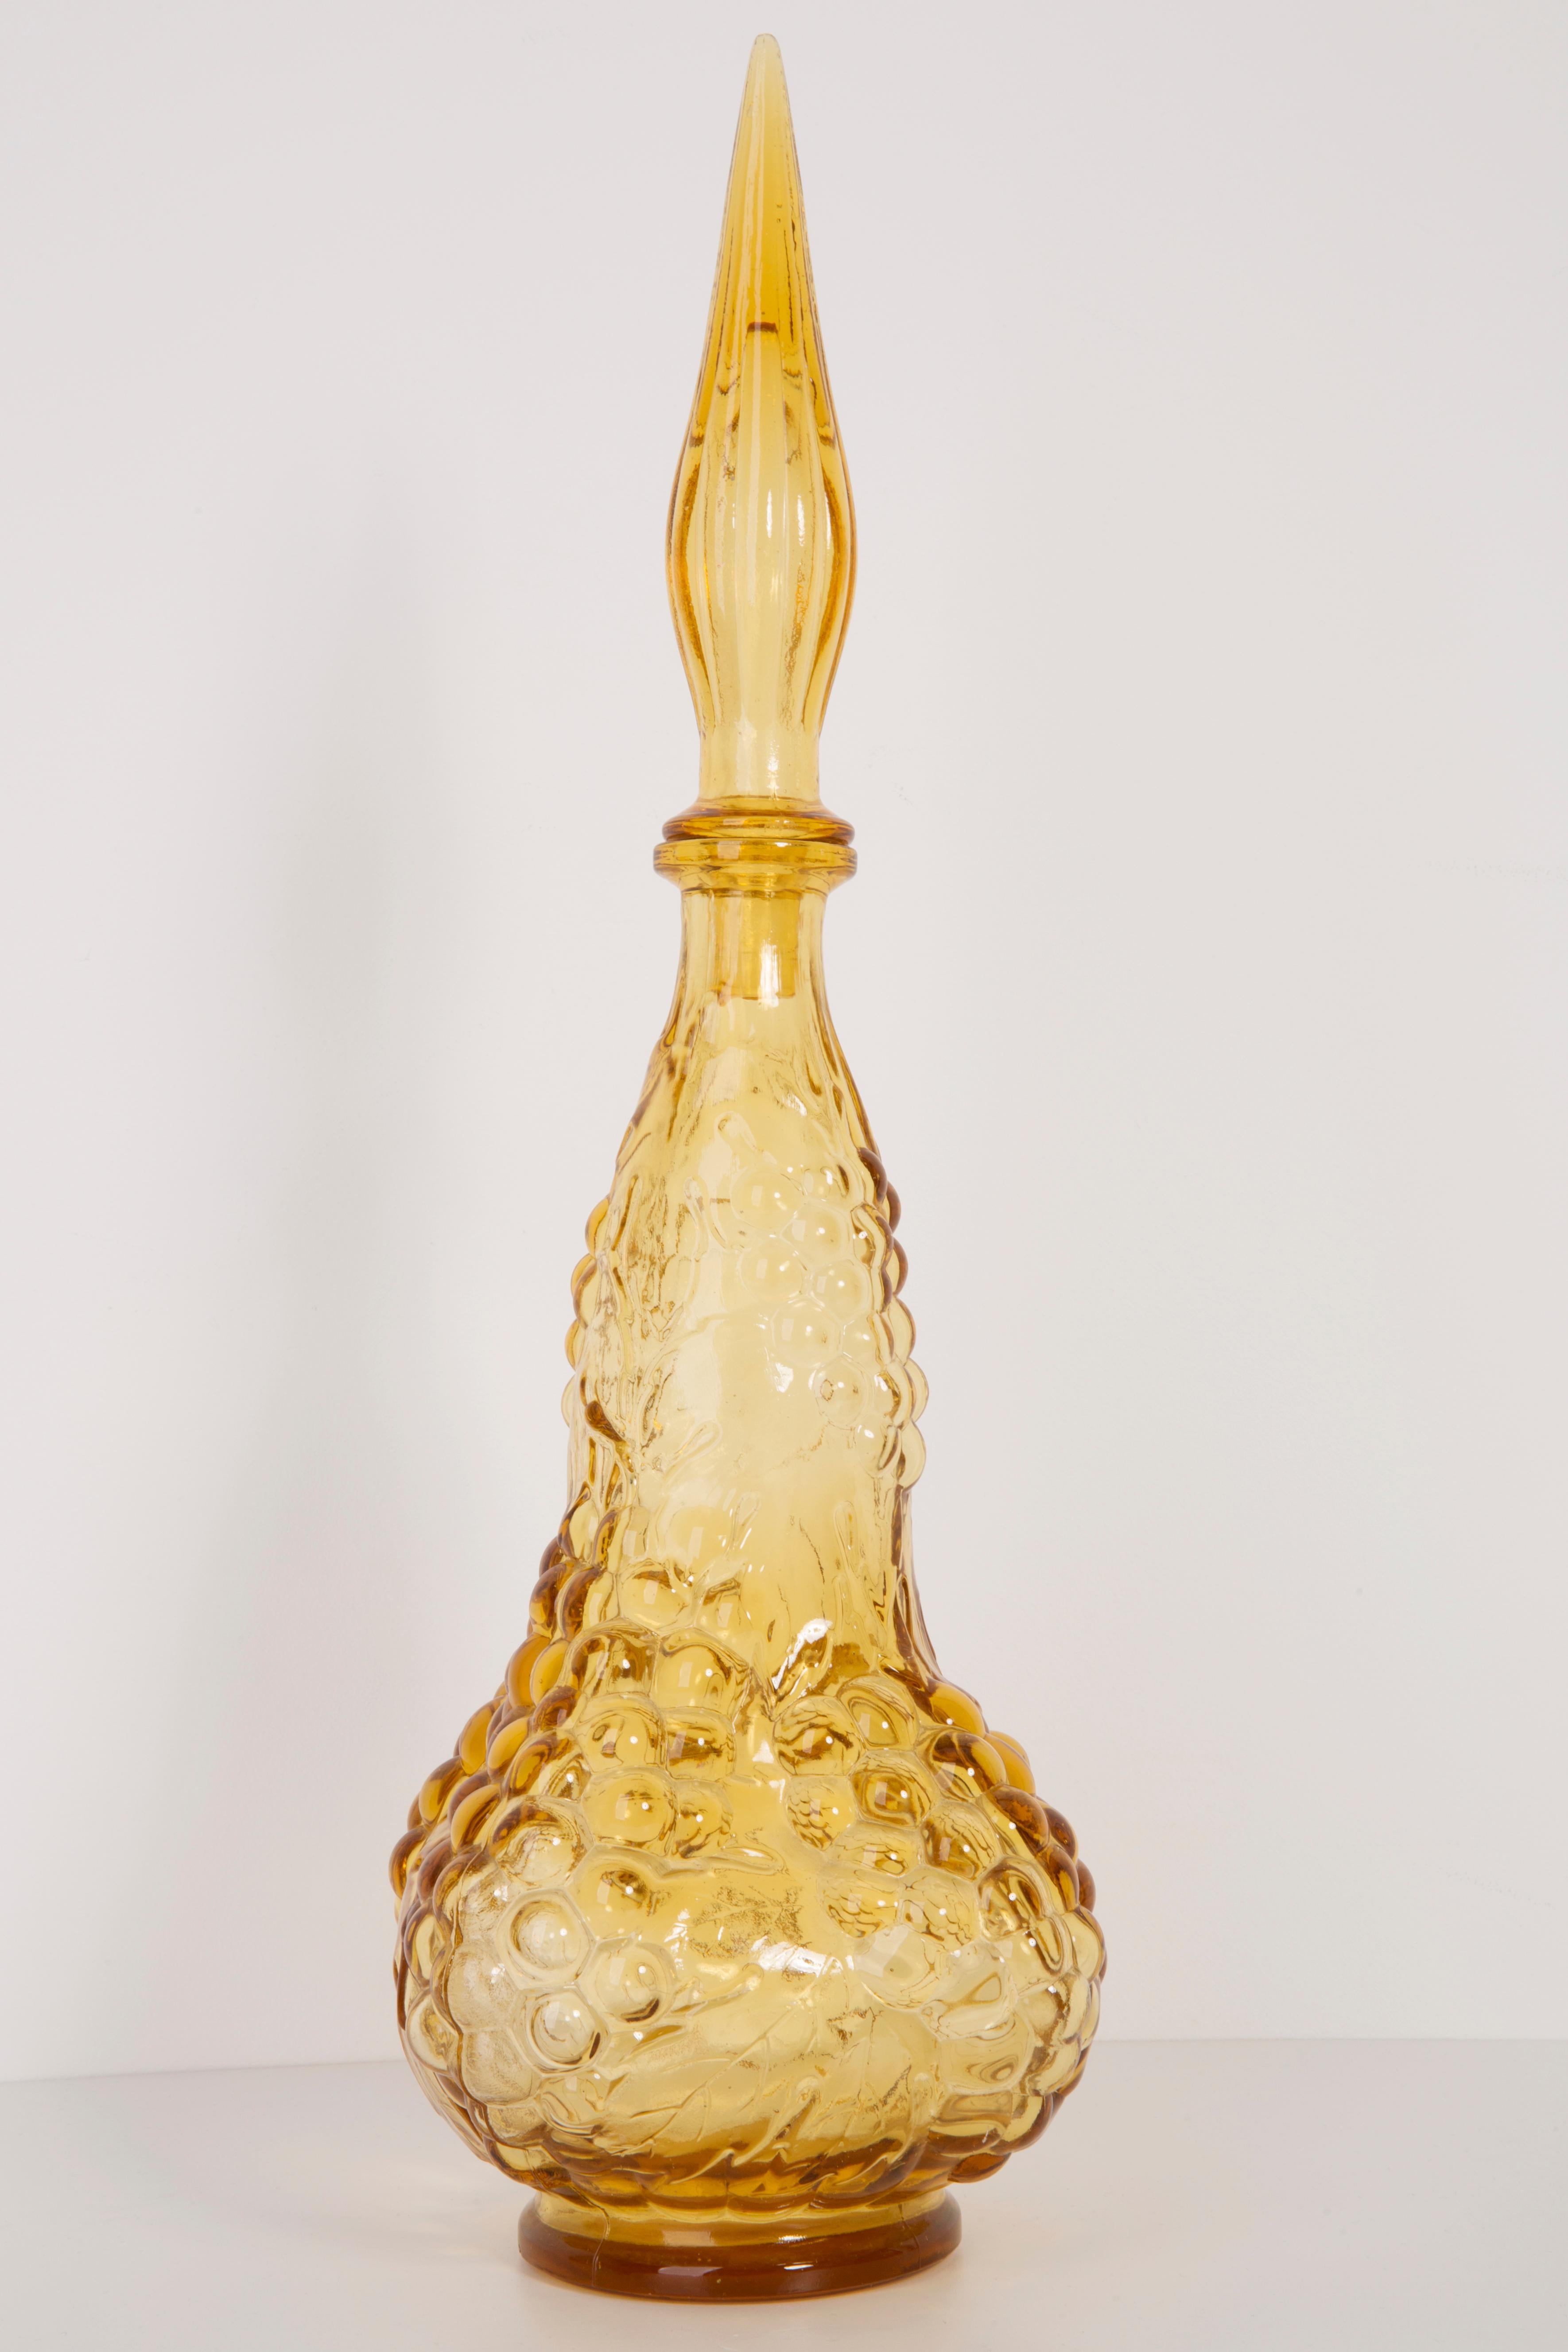 A stunning yellow glass decanter with geometric design, made by one of the many glass manufacturers based in the region of Empoli, Italy. Has 